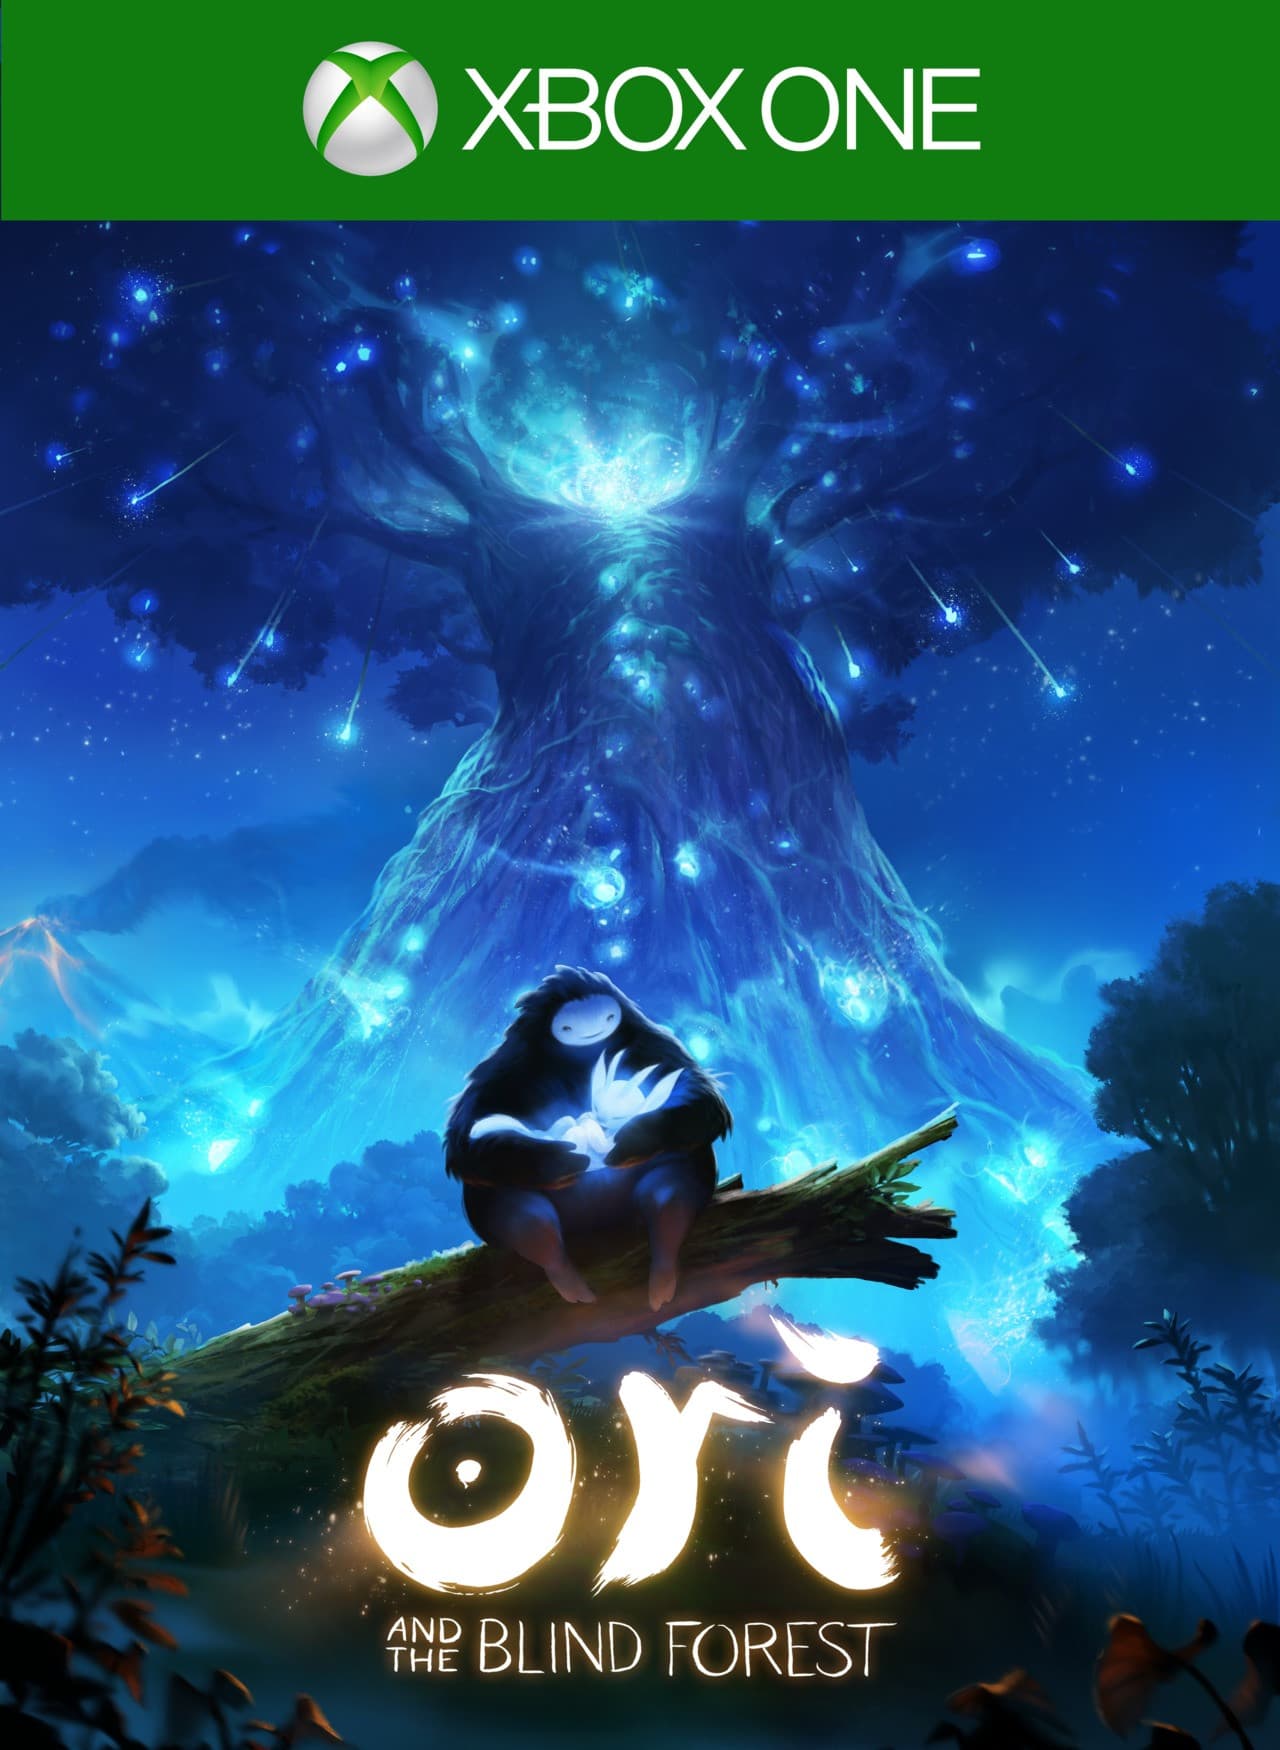 Jaquette Ori and the Blind Forest